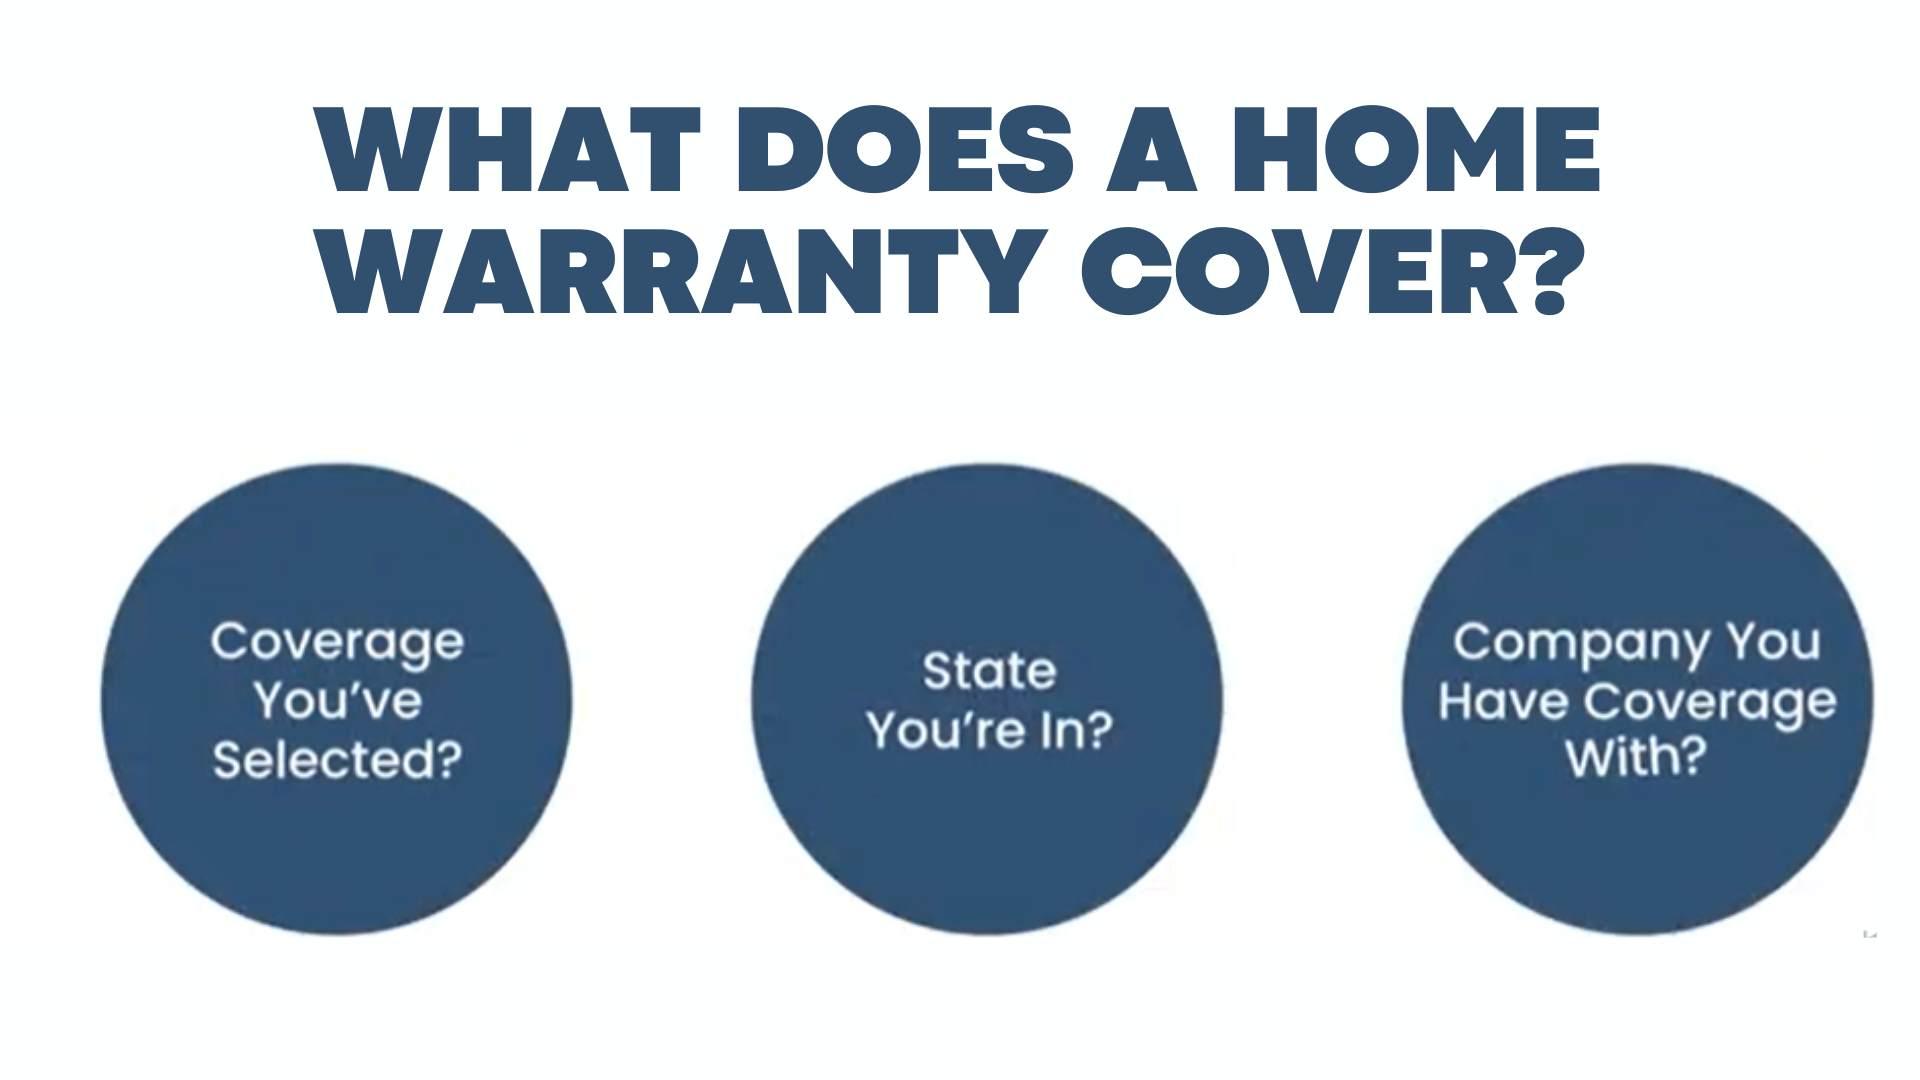 What does a home warranty cover?